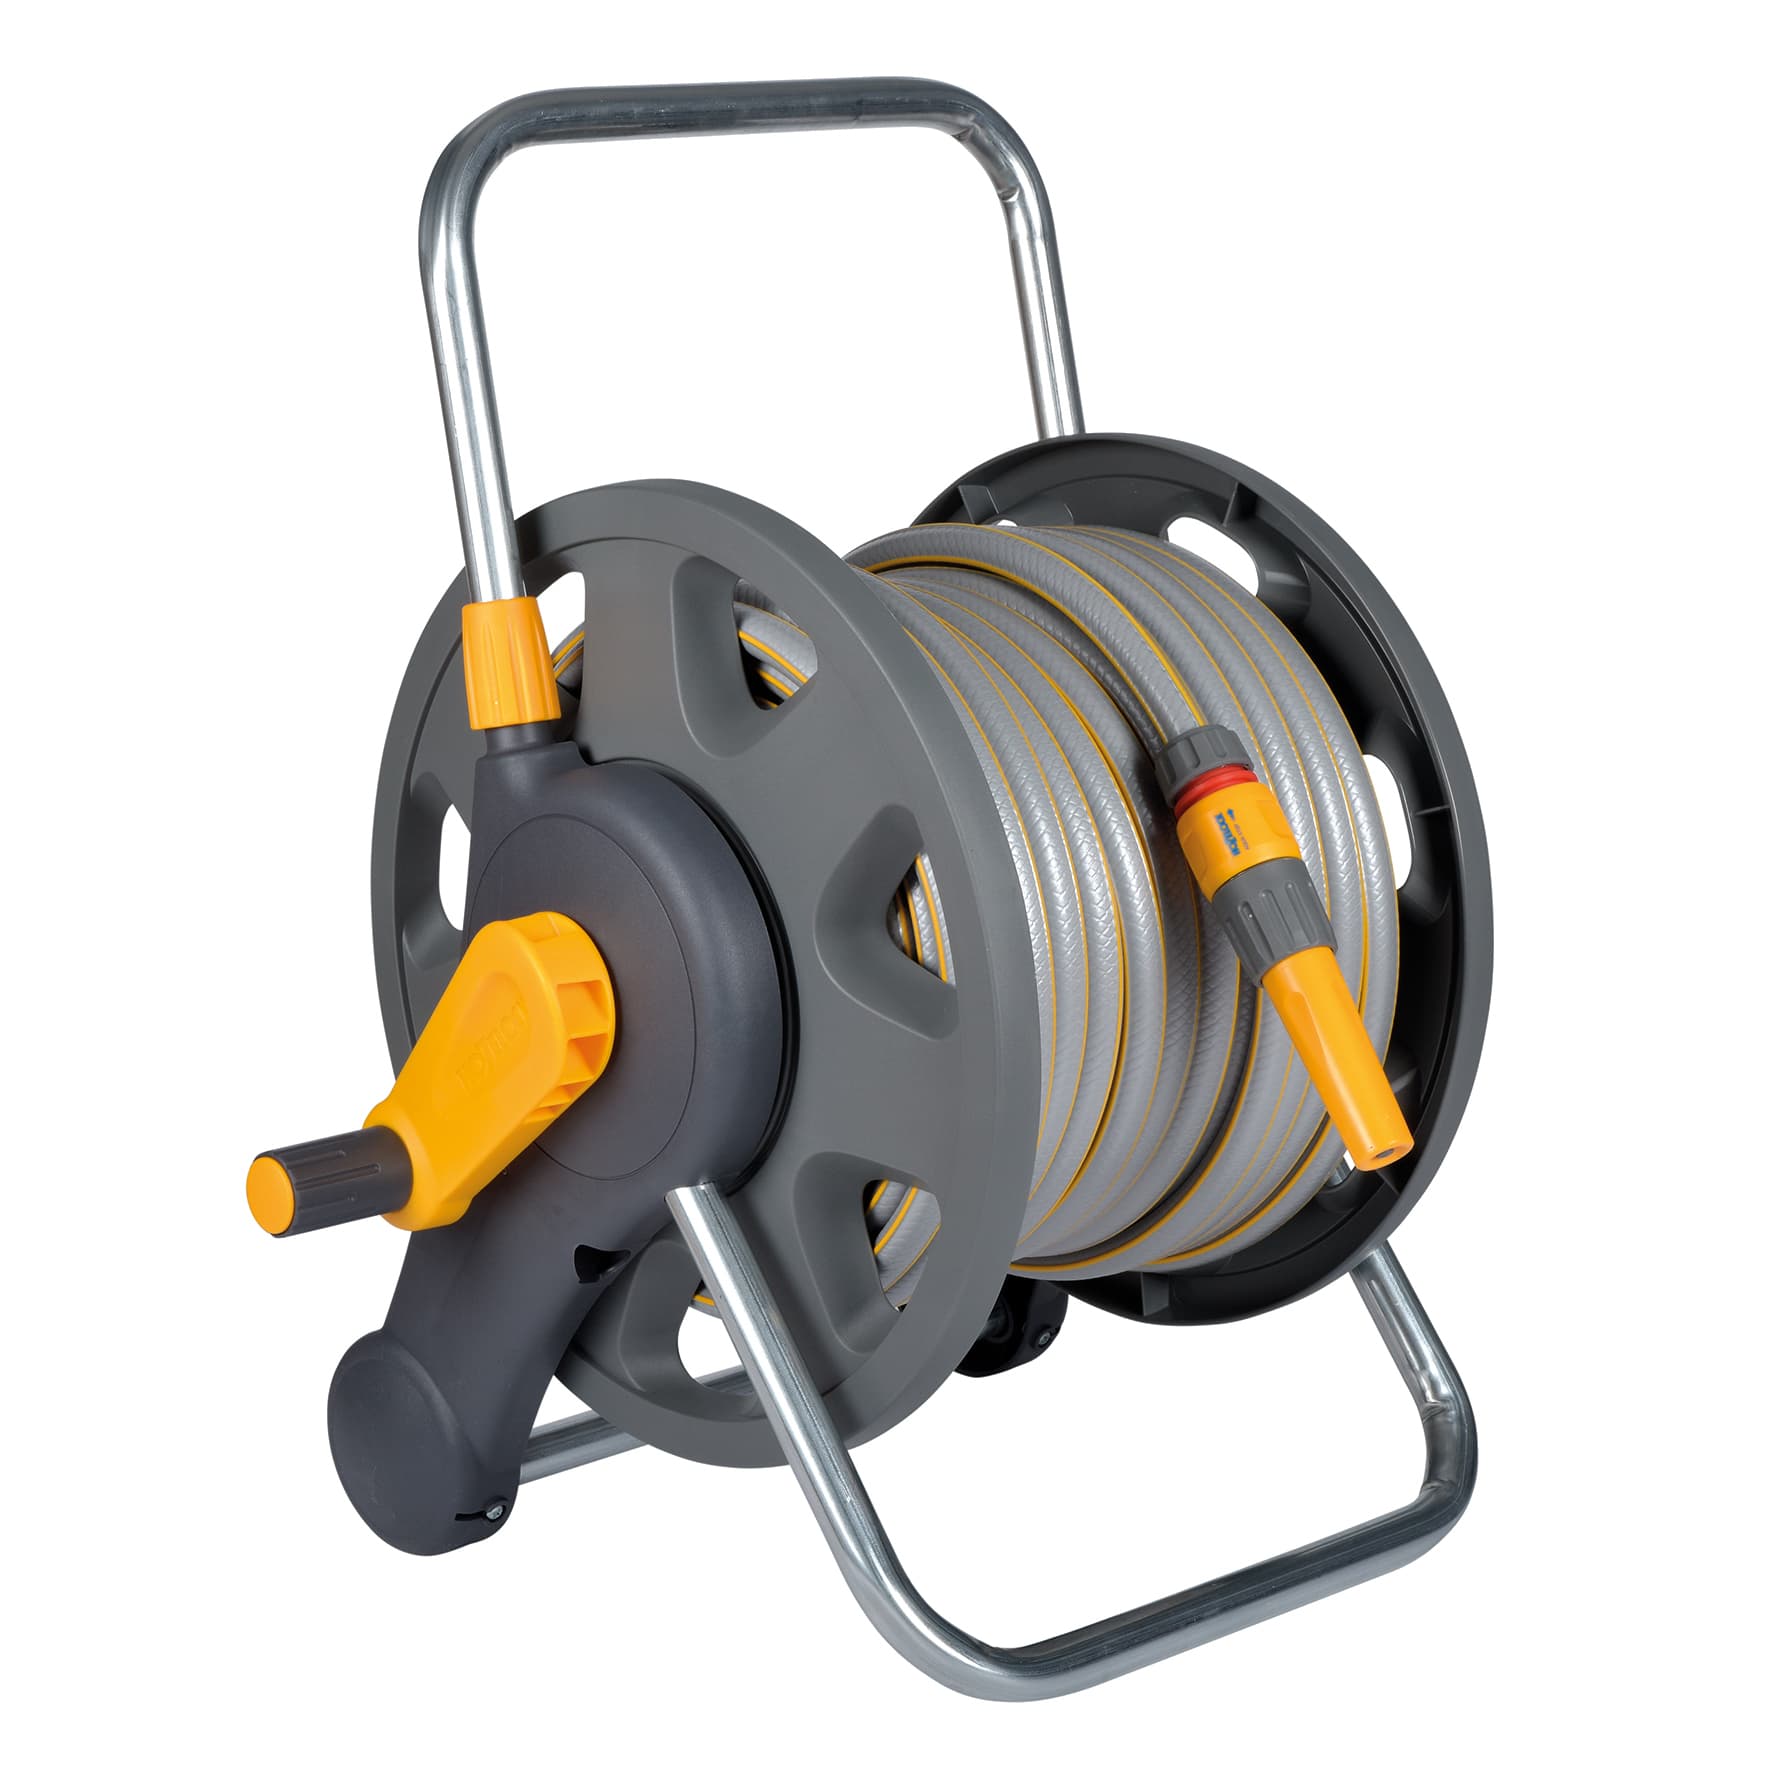 Assembled 2-in-1 Hose Reel (60m) With Hose